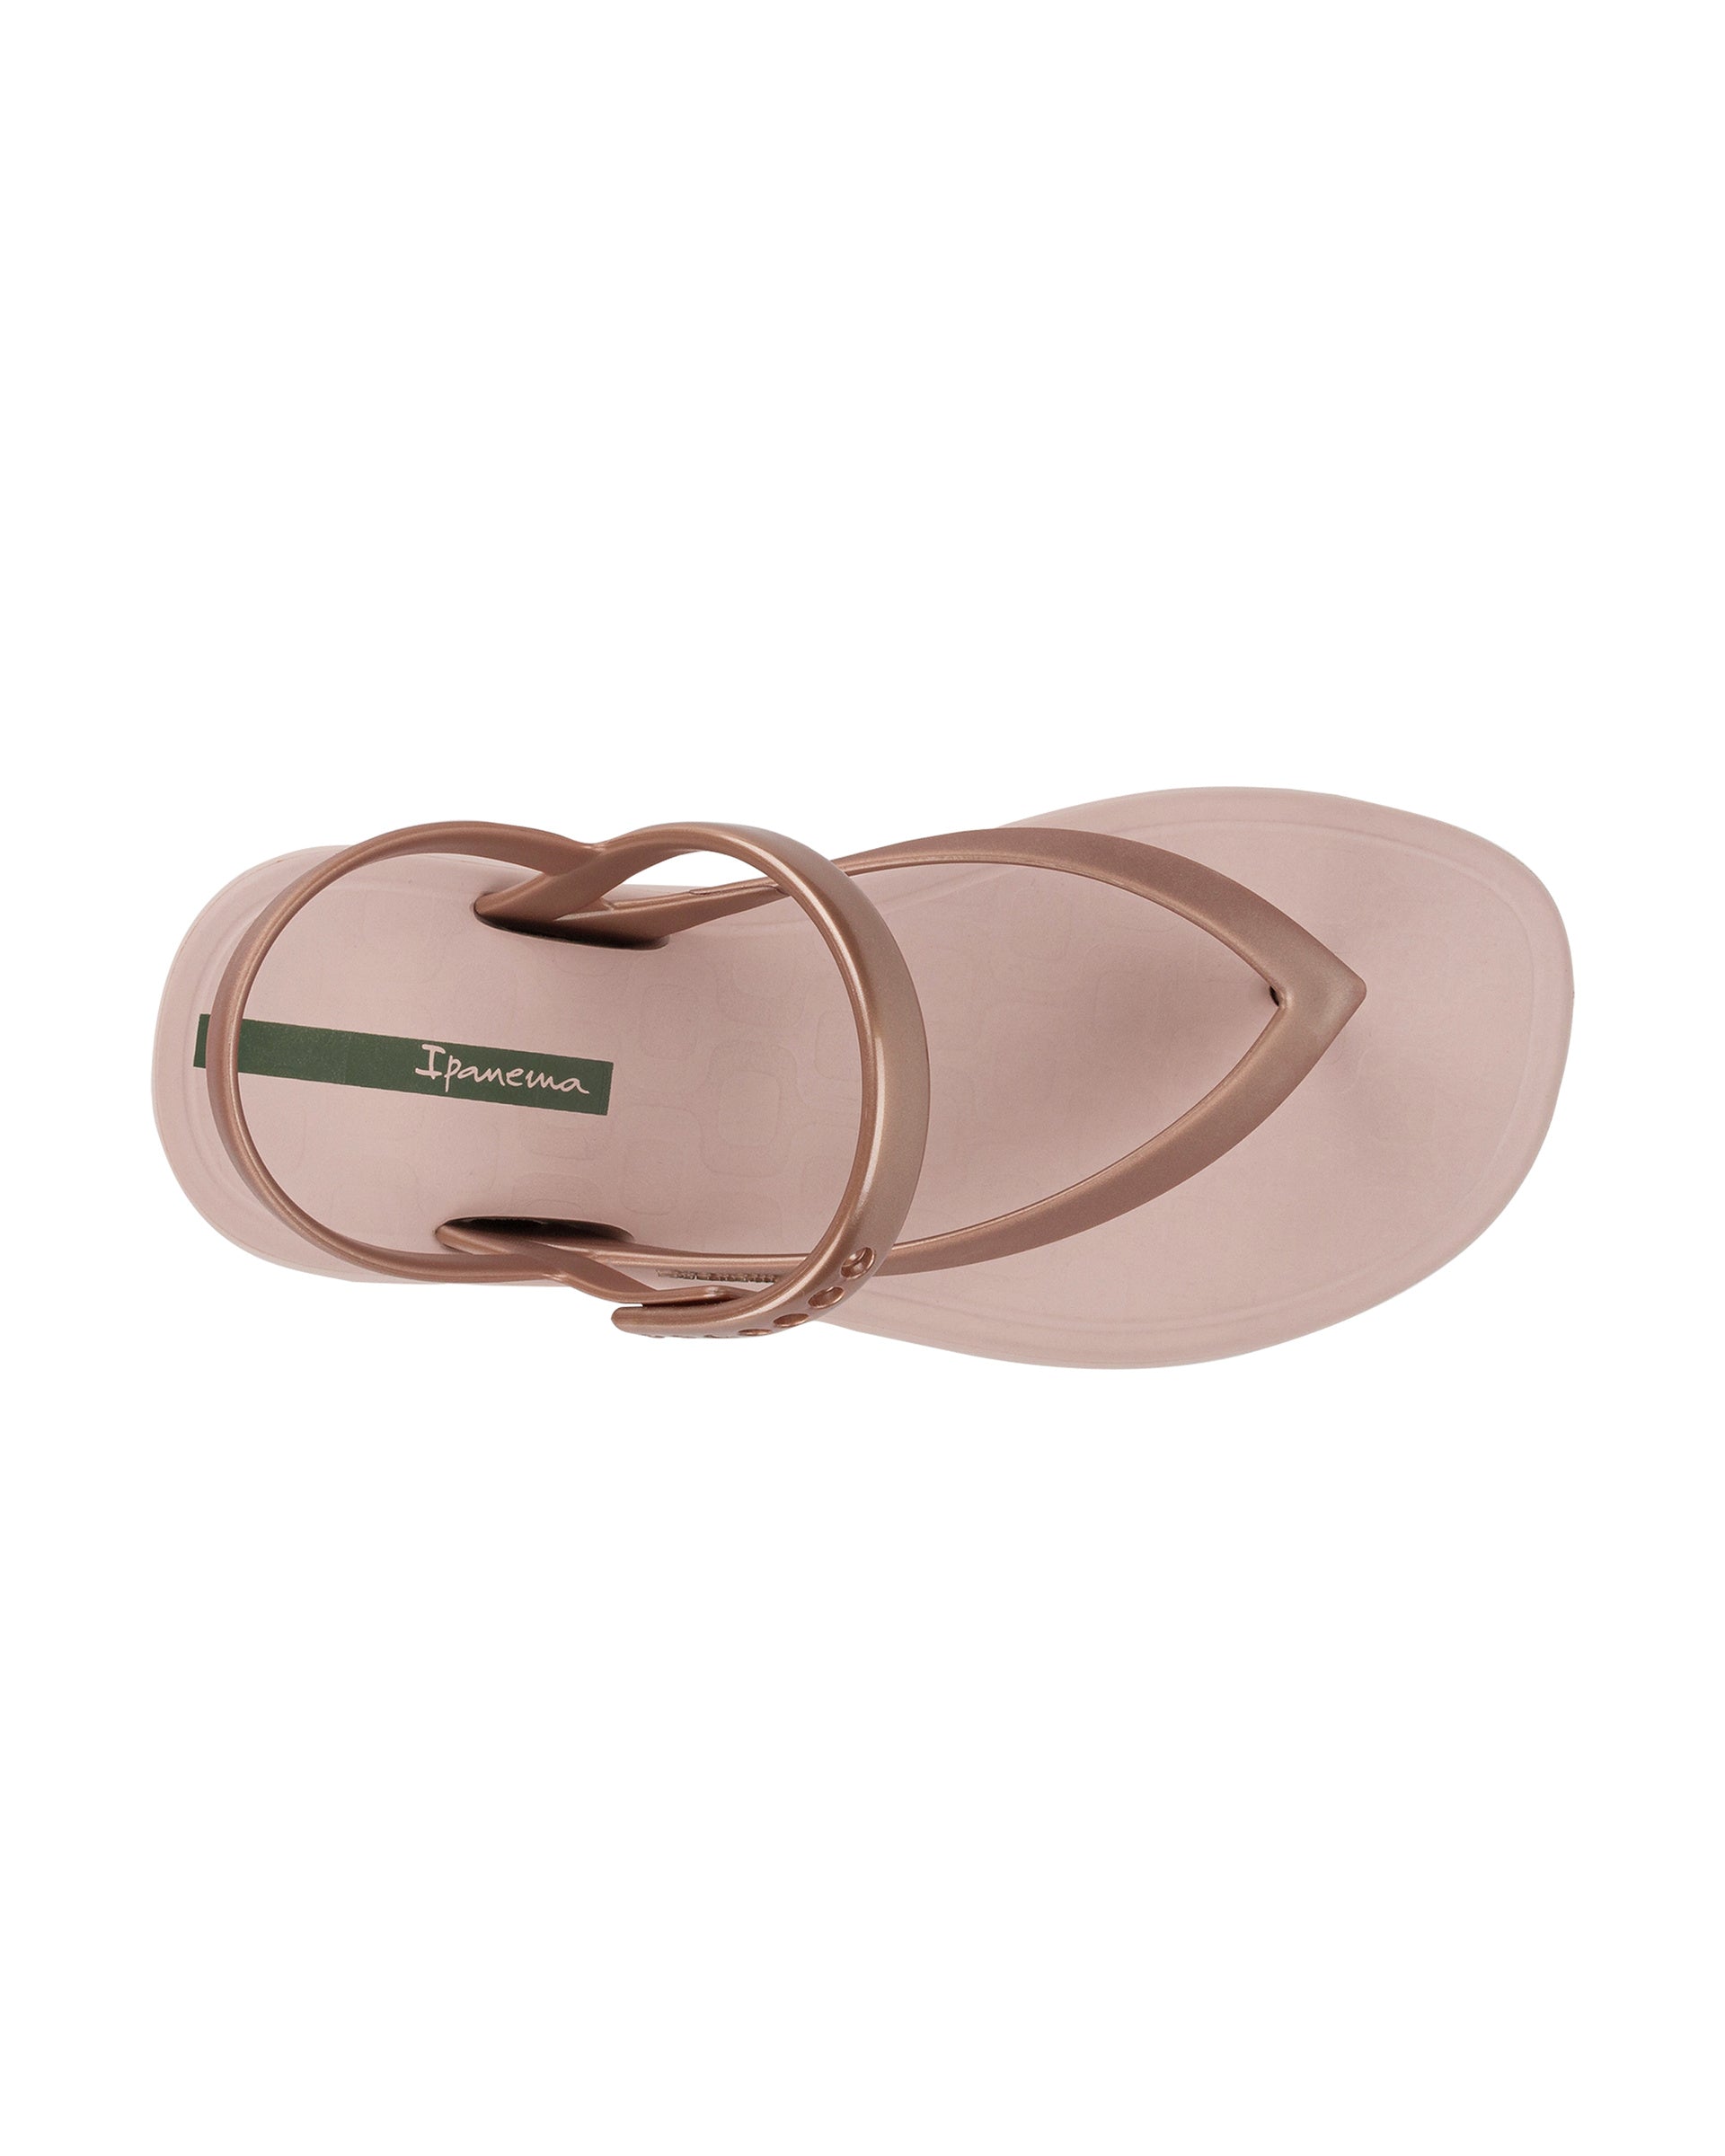 Top view of a pink Ipanema Verano women's sandal.